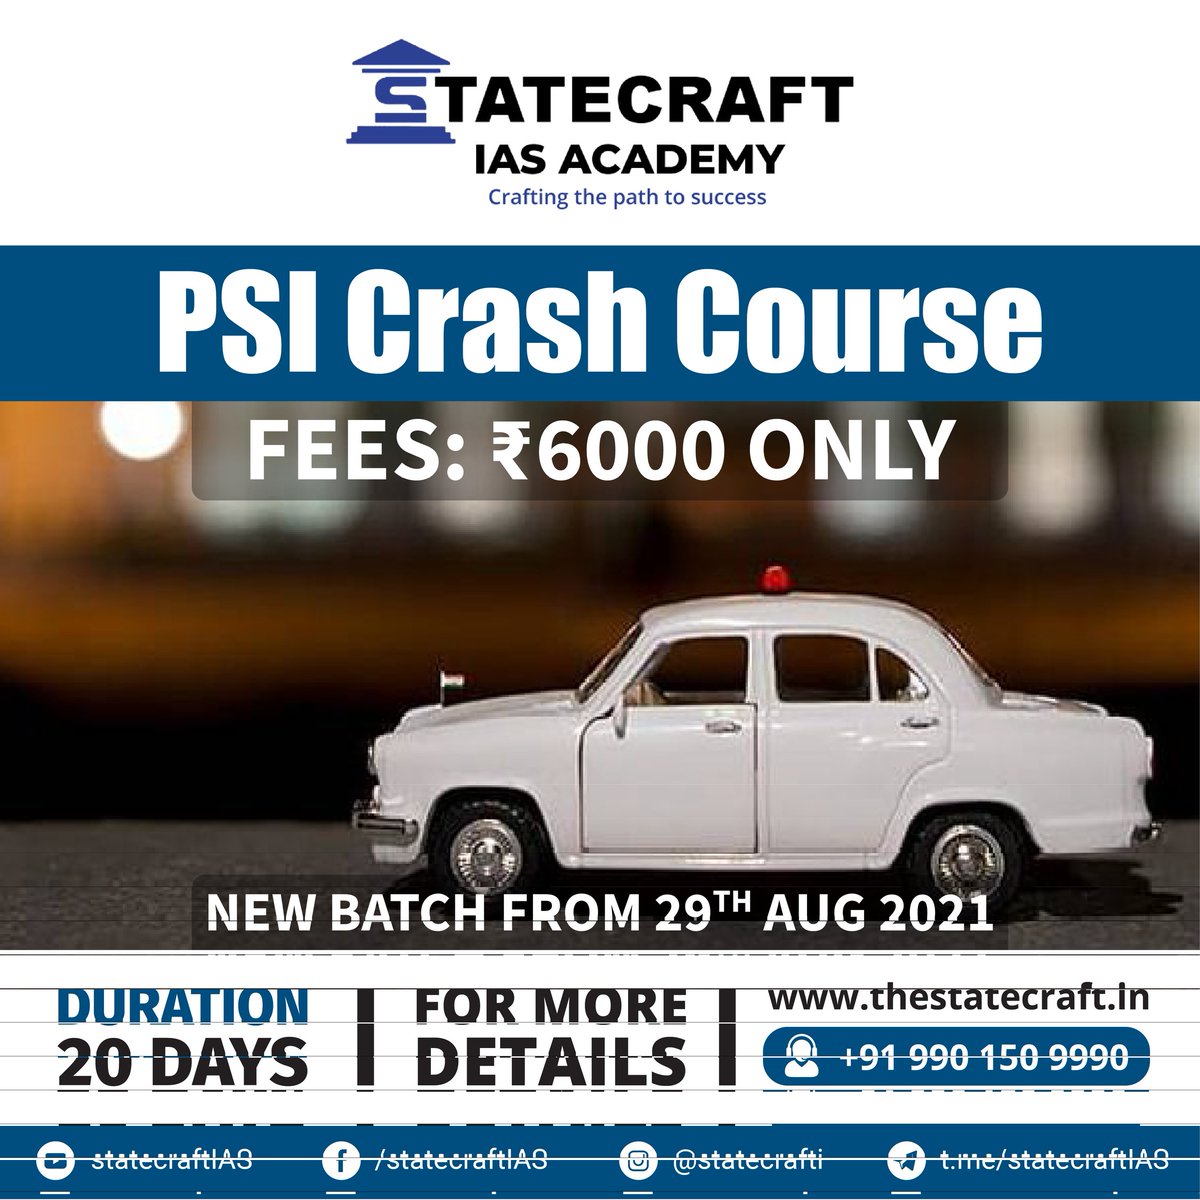 #PSI crash course 

Duration : 20 days 

Slot : Monday to Saturday

Classes by Subject Experts.

New batch from 29th Aug

For Registration call us at 9901509990

Or thestatecraft.in

#KPSC #PSI #UPSC #civilservices #KAS
#KASAspirant #statecratias